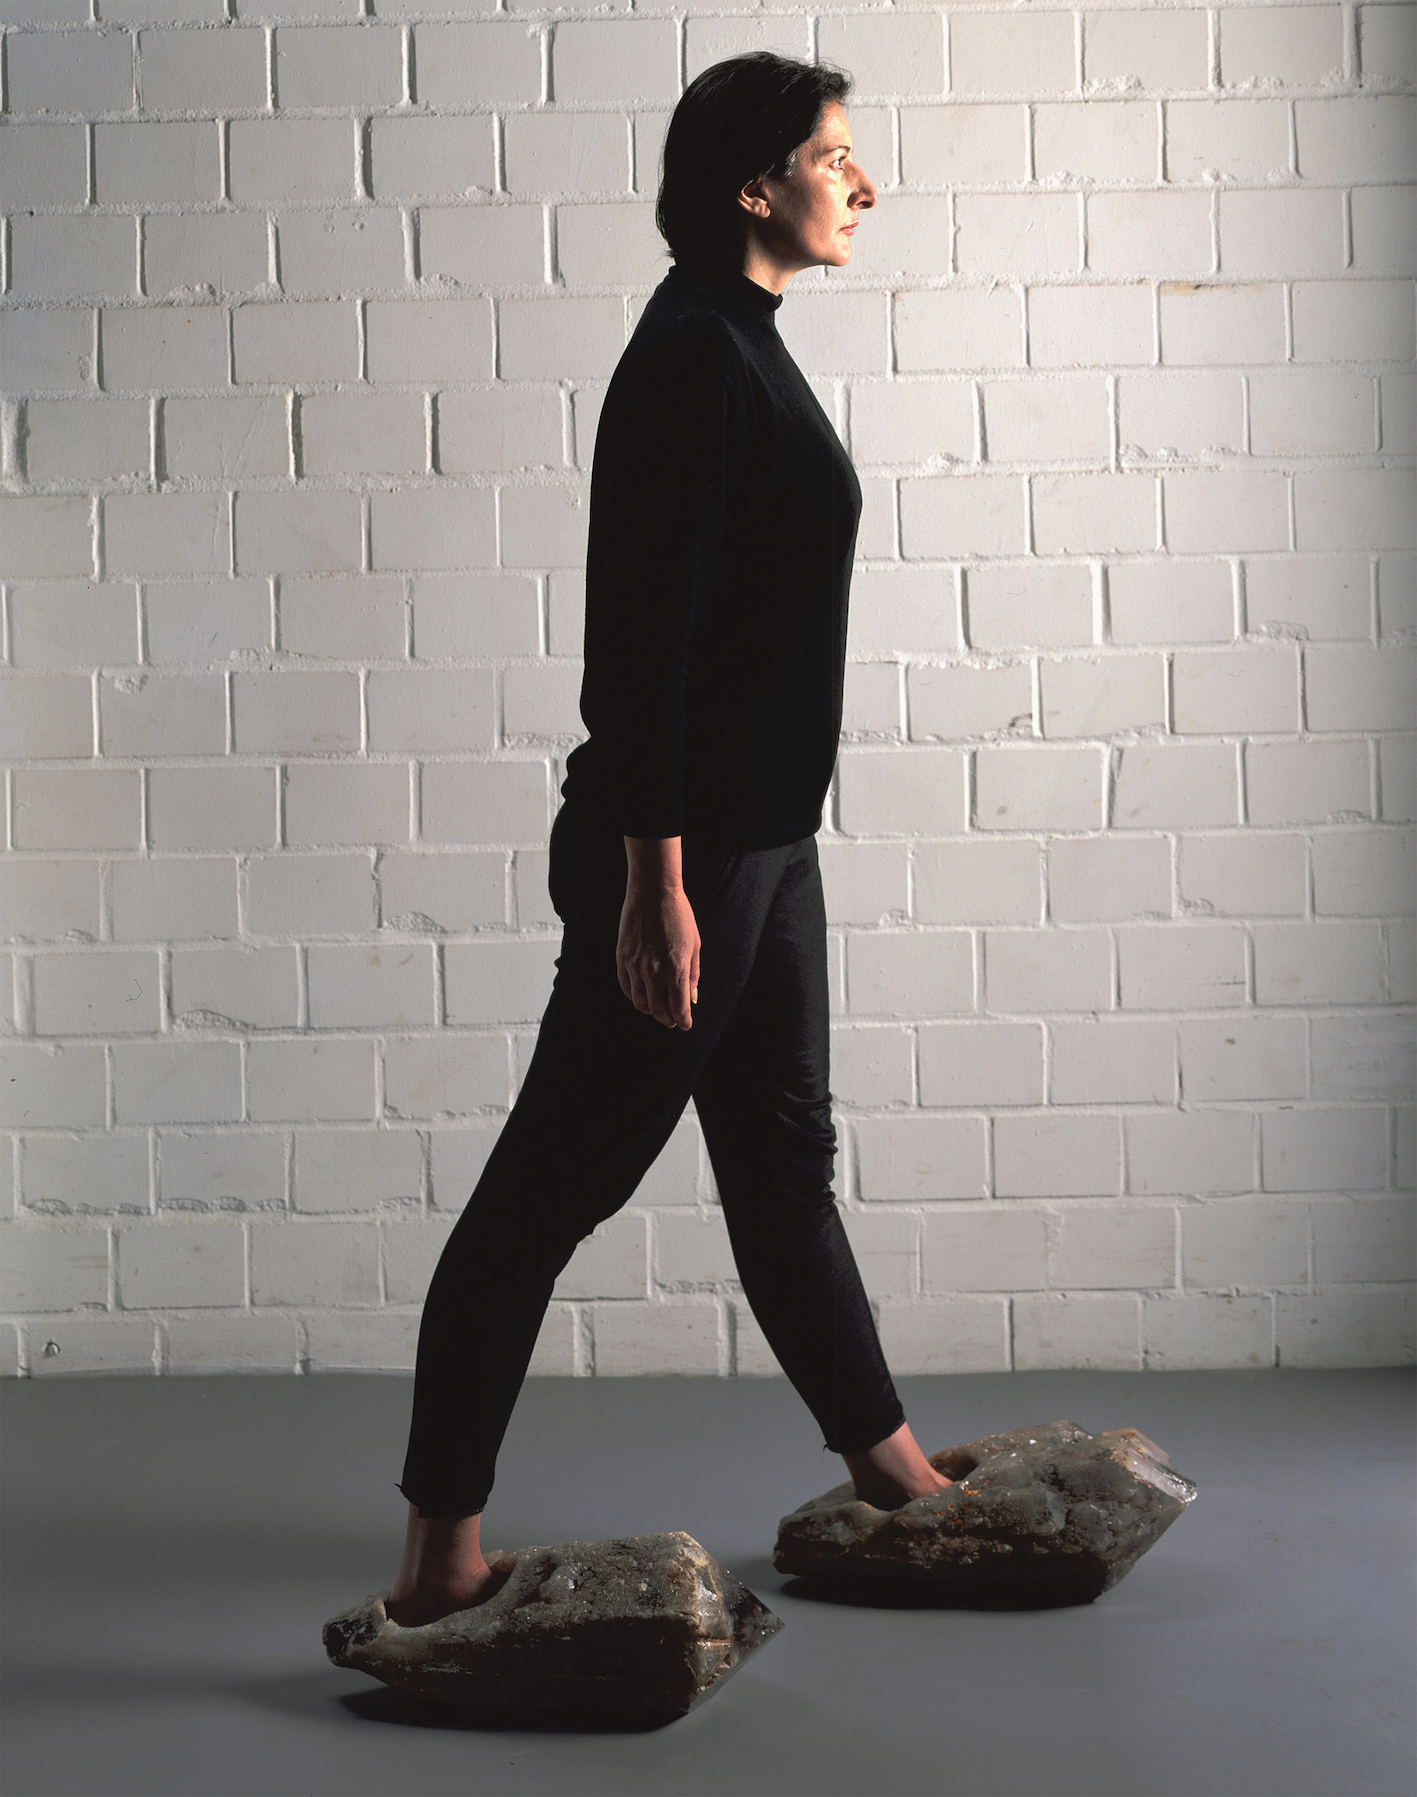 Marina Abramović, Shoes for Departure.